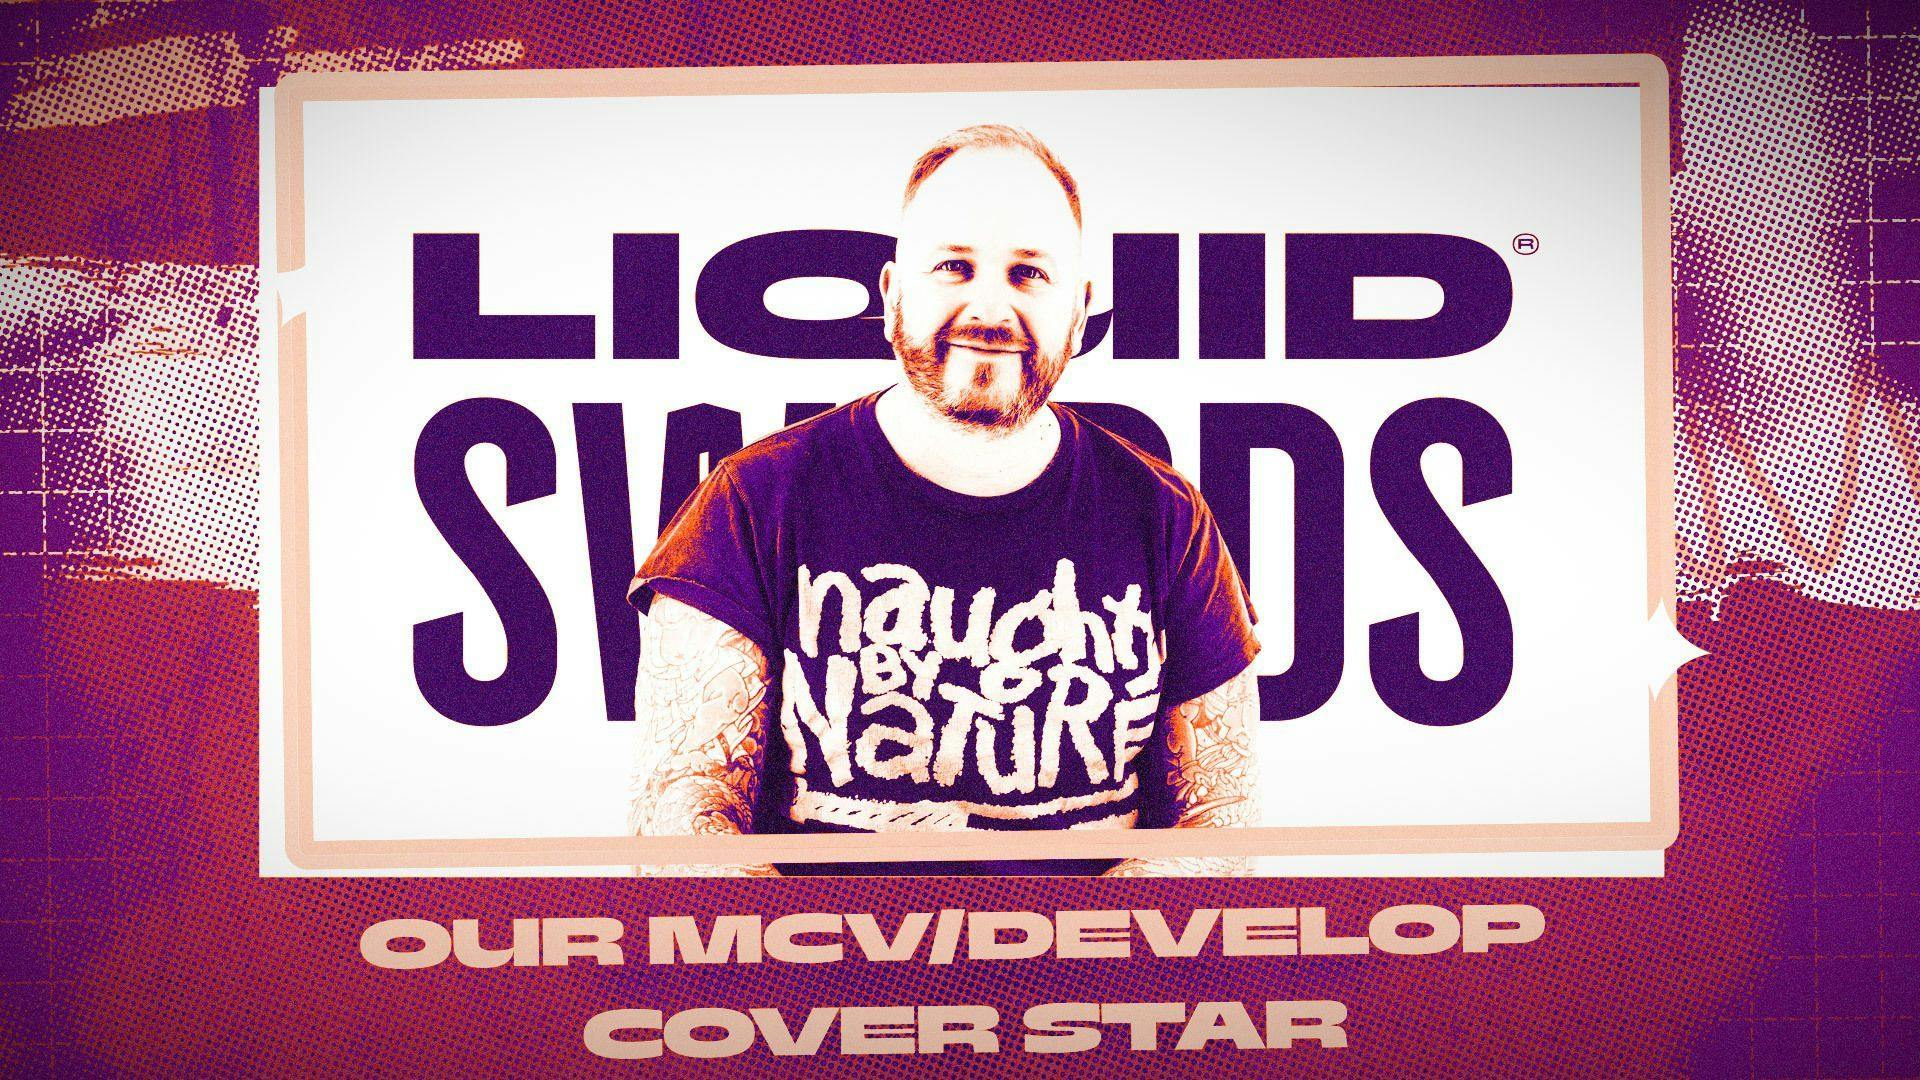 Christofer Sundberg wearing a Naughty by Nature t-shirt in front of the Liquid Swords logo. Below him reads Our MCV/Develop Cover Star